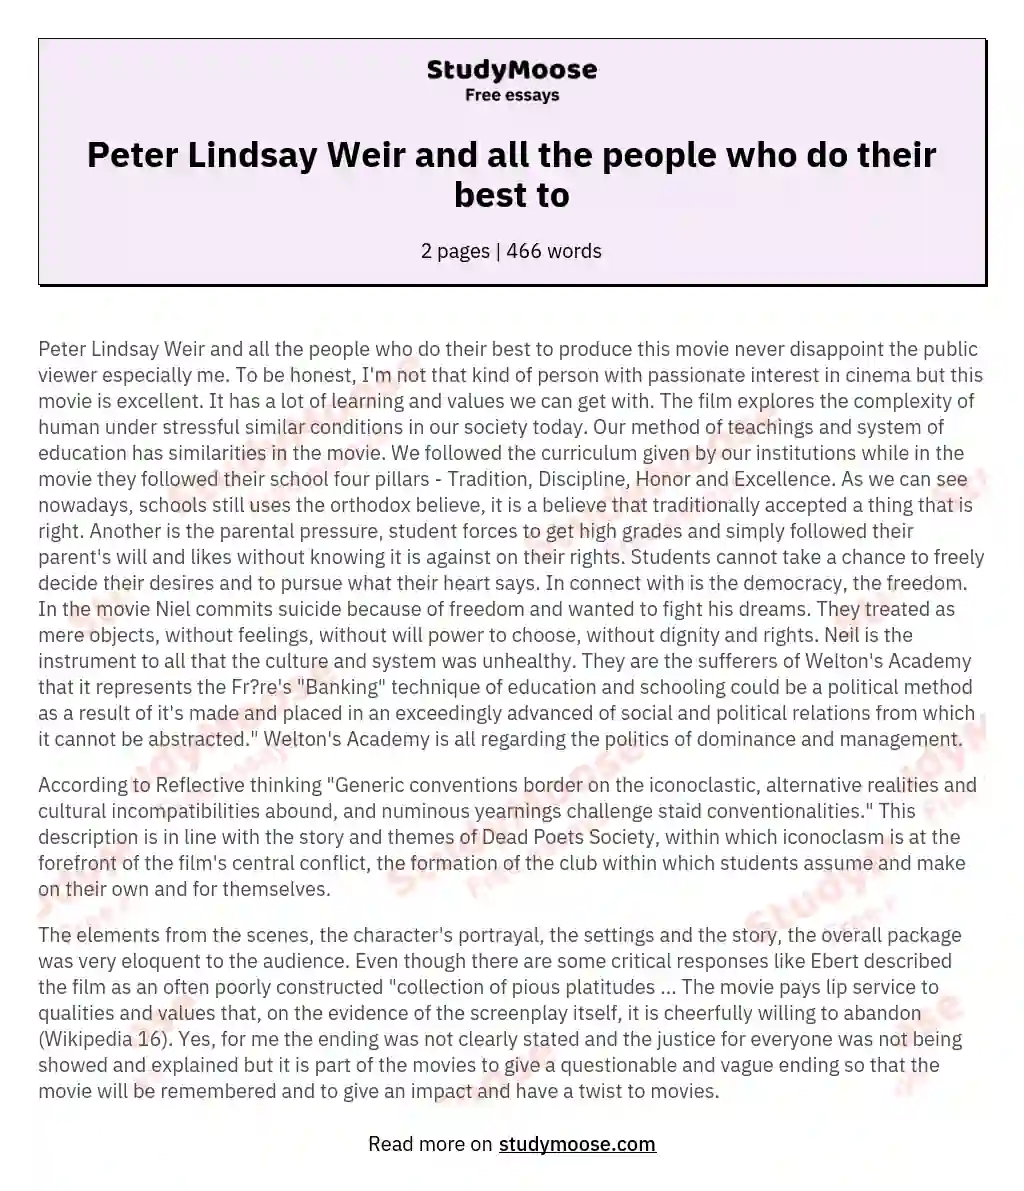 Peter Lindsay Weir and all the people who do their best to essay